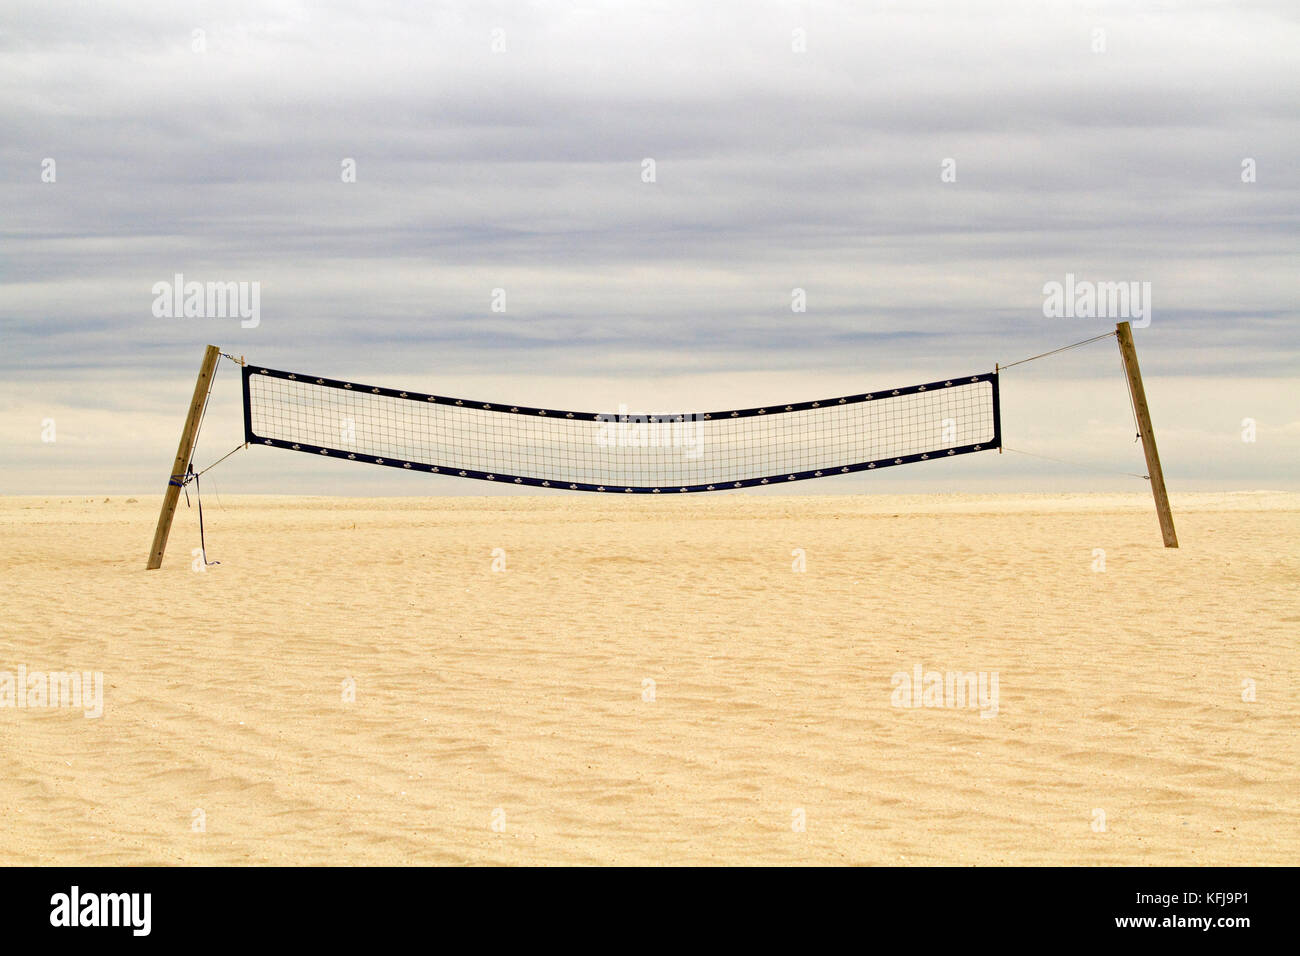 Beach Volleyball net am Strand in Cape May, New Jersey, USA Stockfoto